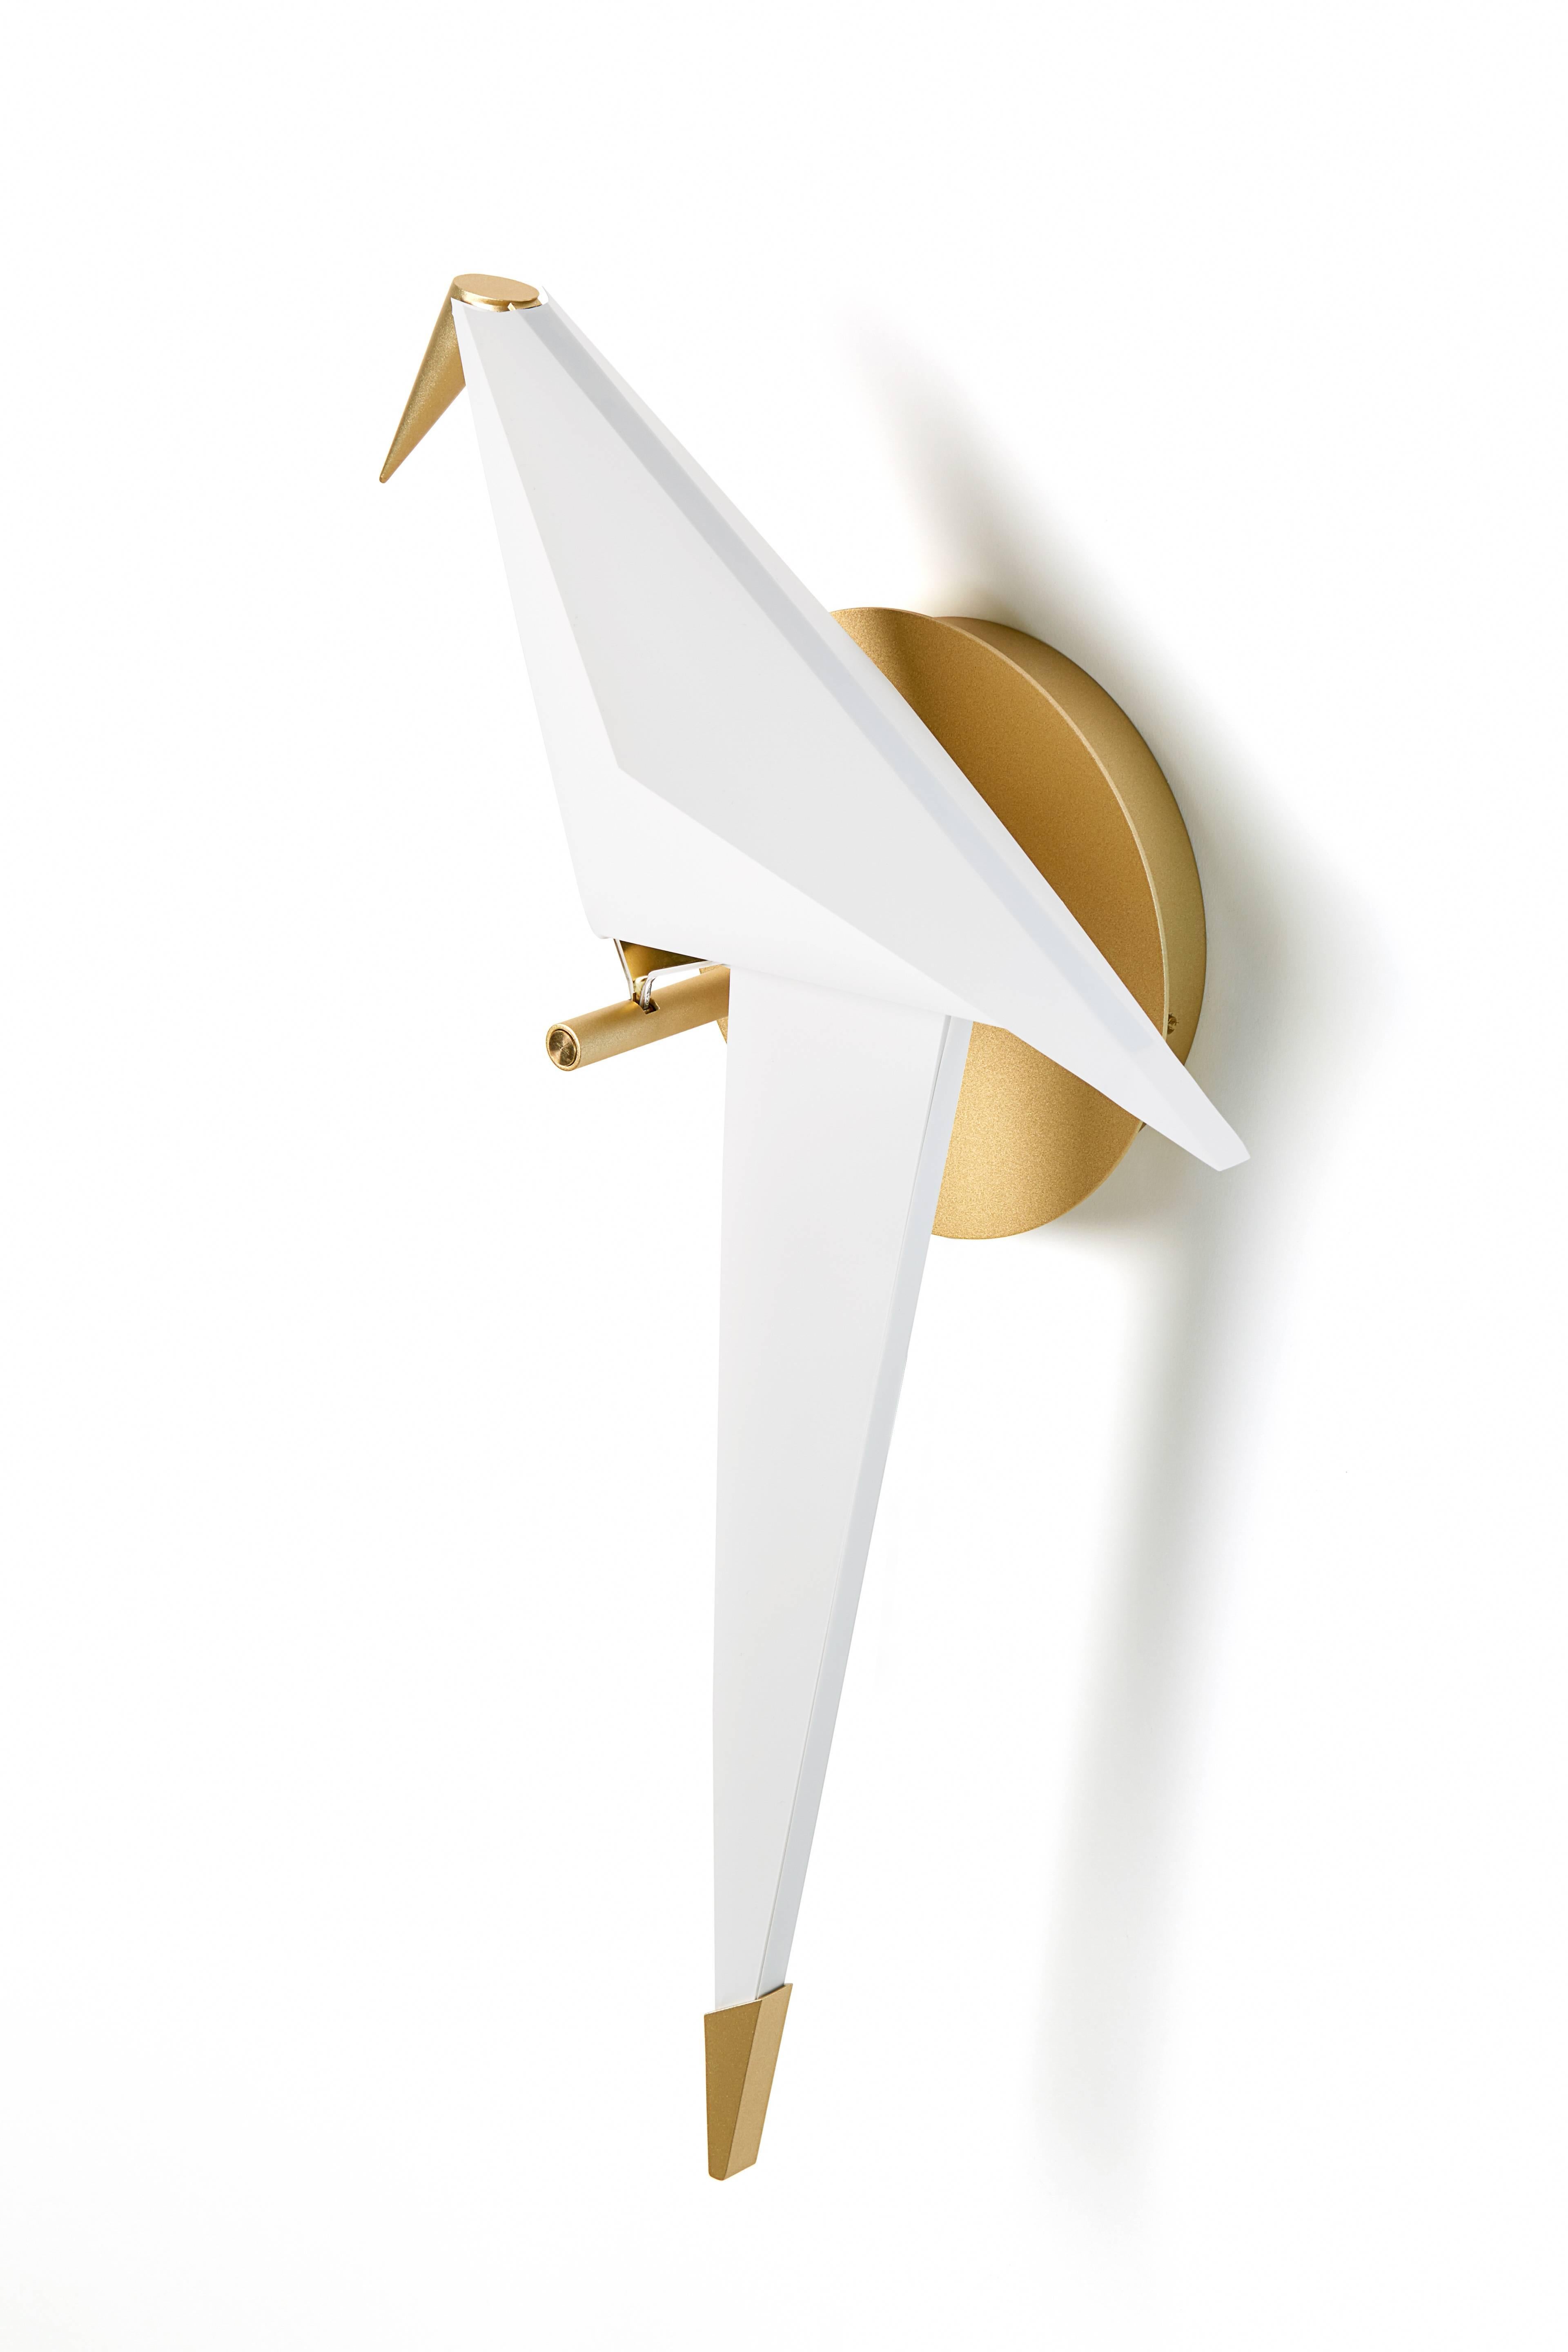 Moooi Perch LED Wall Sconce Light in Brass with Large White Bird For Sale 1